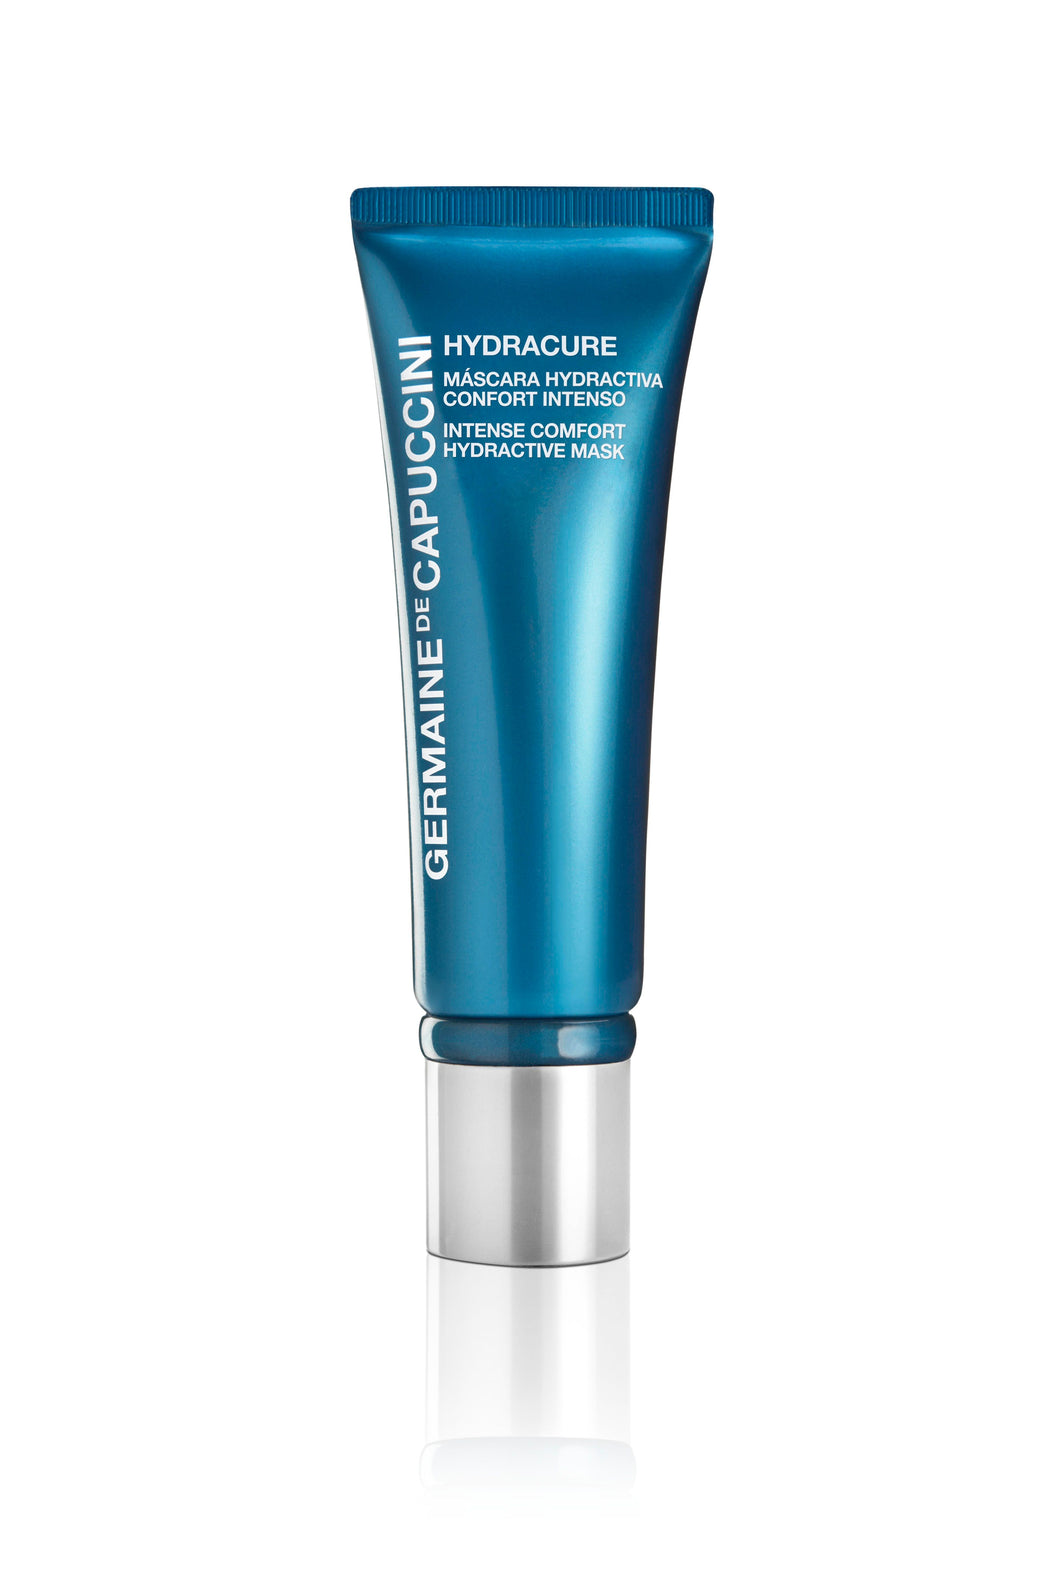 Hydracure - Intense Comfort Hydractive Mask